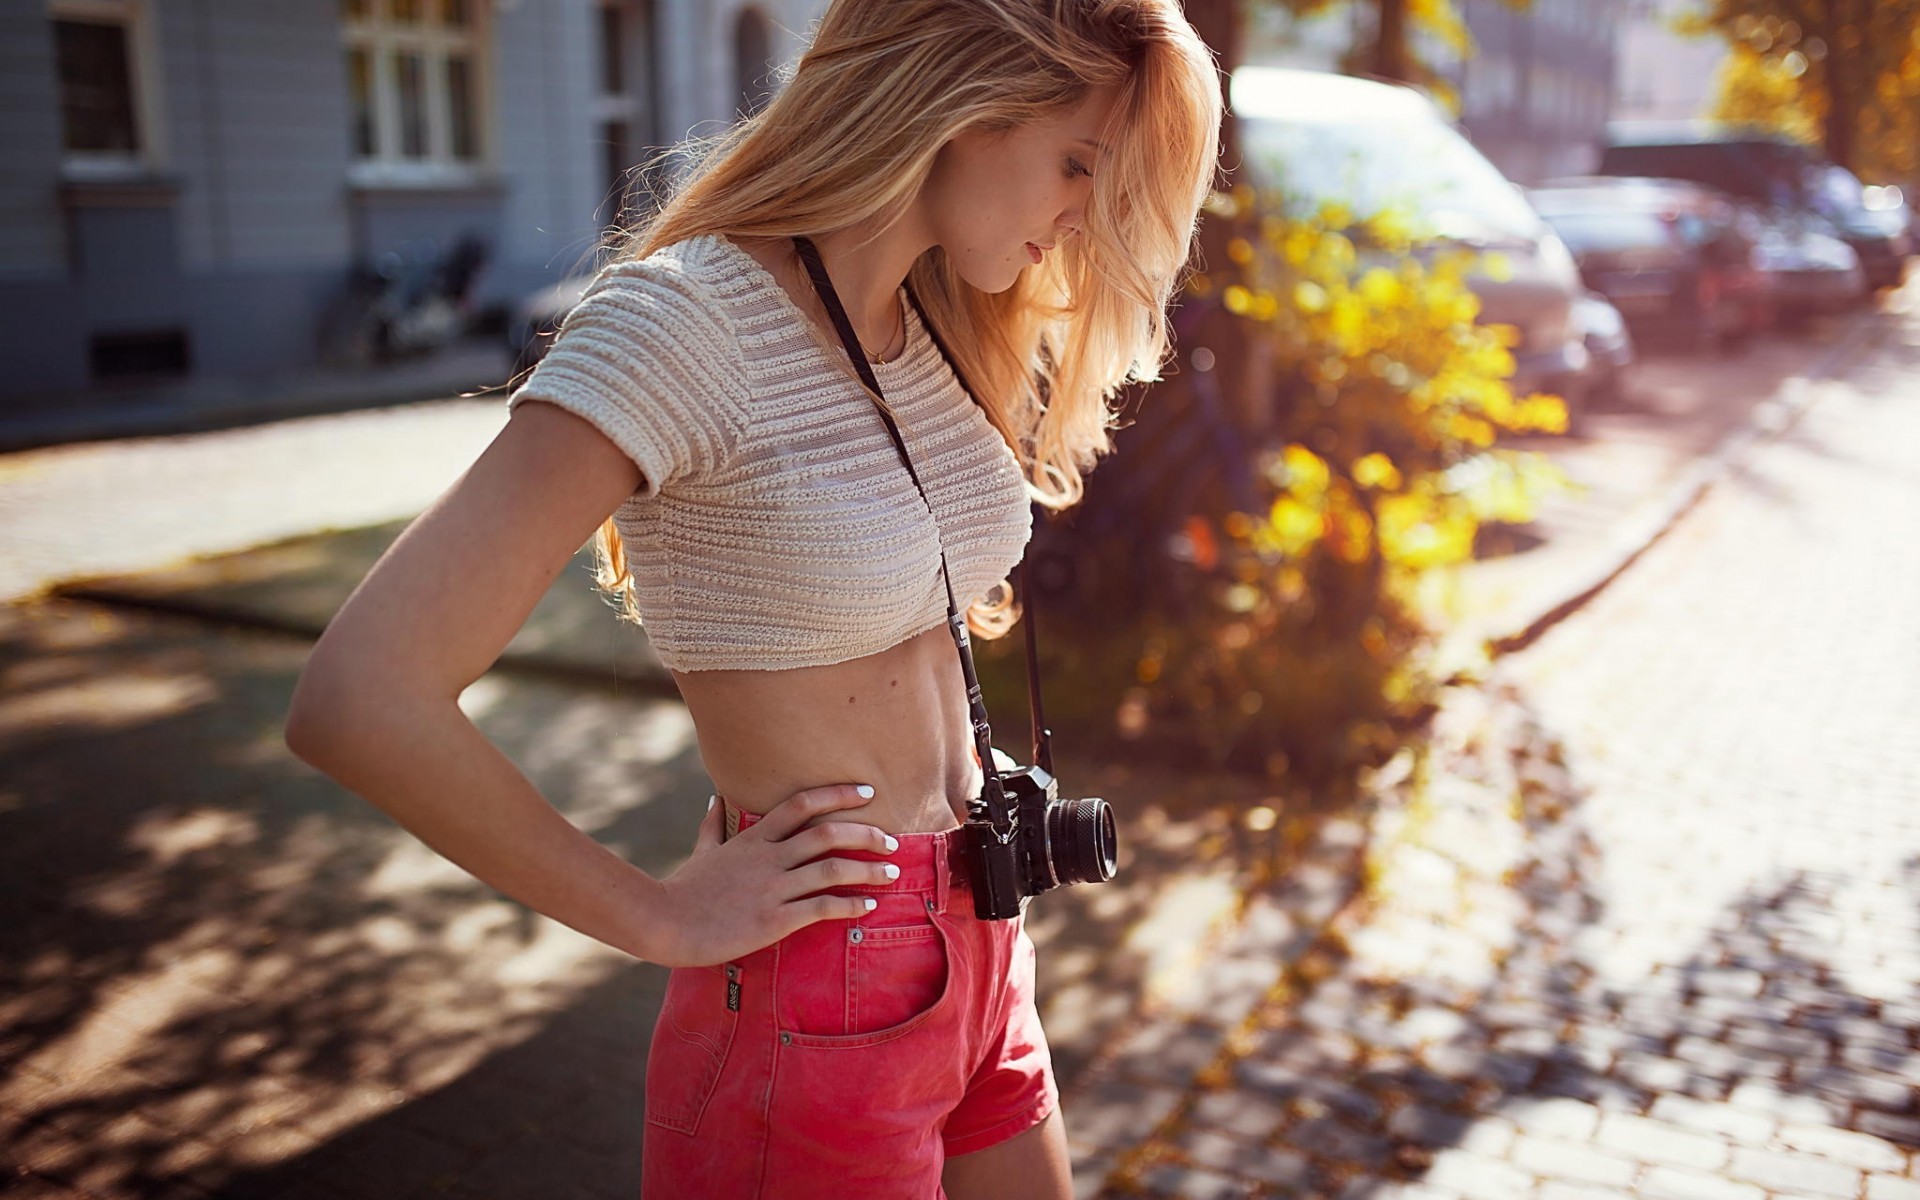 People 1920x1200 blonde camera women skinny Andre Josselin urban women outdoors model boobs outdoors belly long hair standing short tops shorts hands on hips see-through clothing depth of field